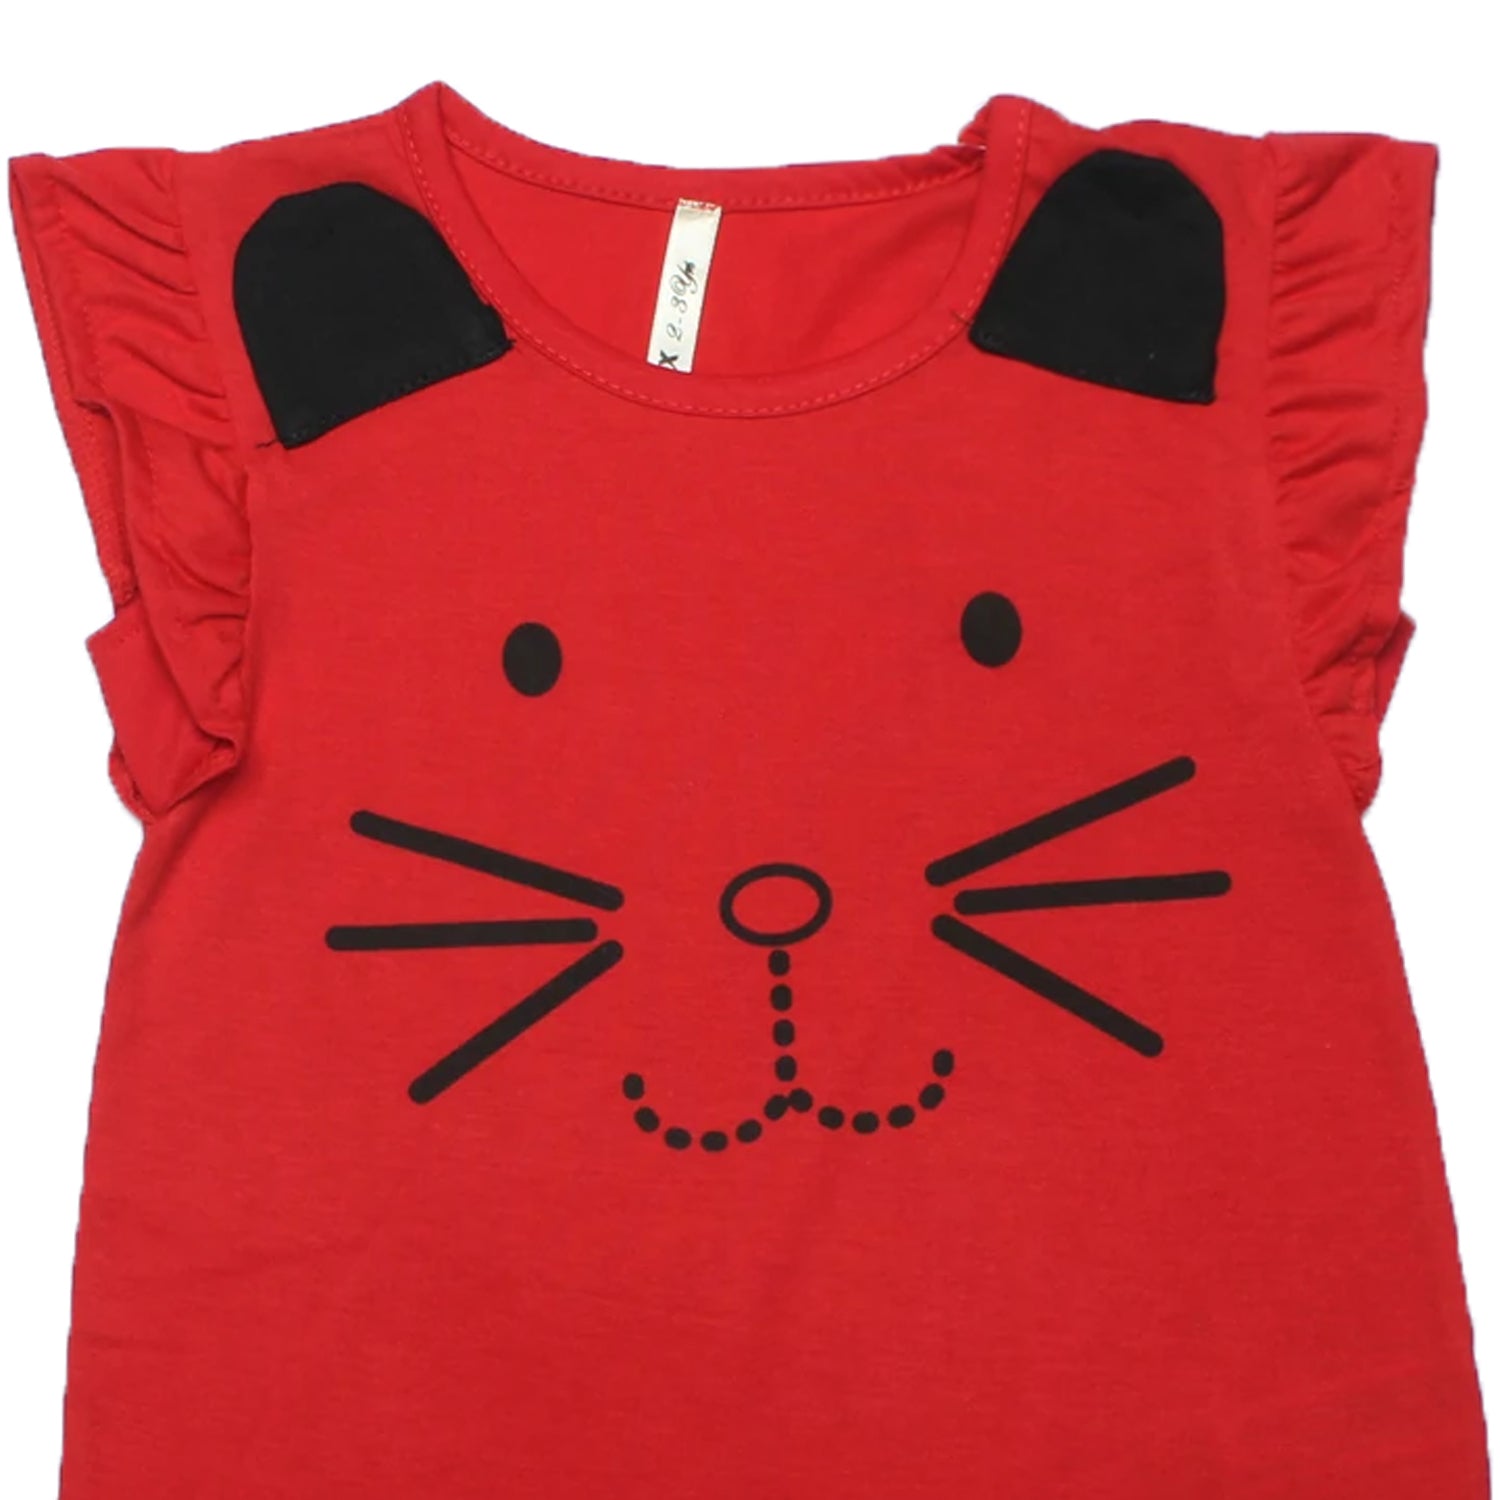 RED KITTY PRINTED T-SHIRT TOP